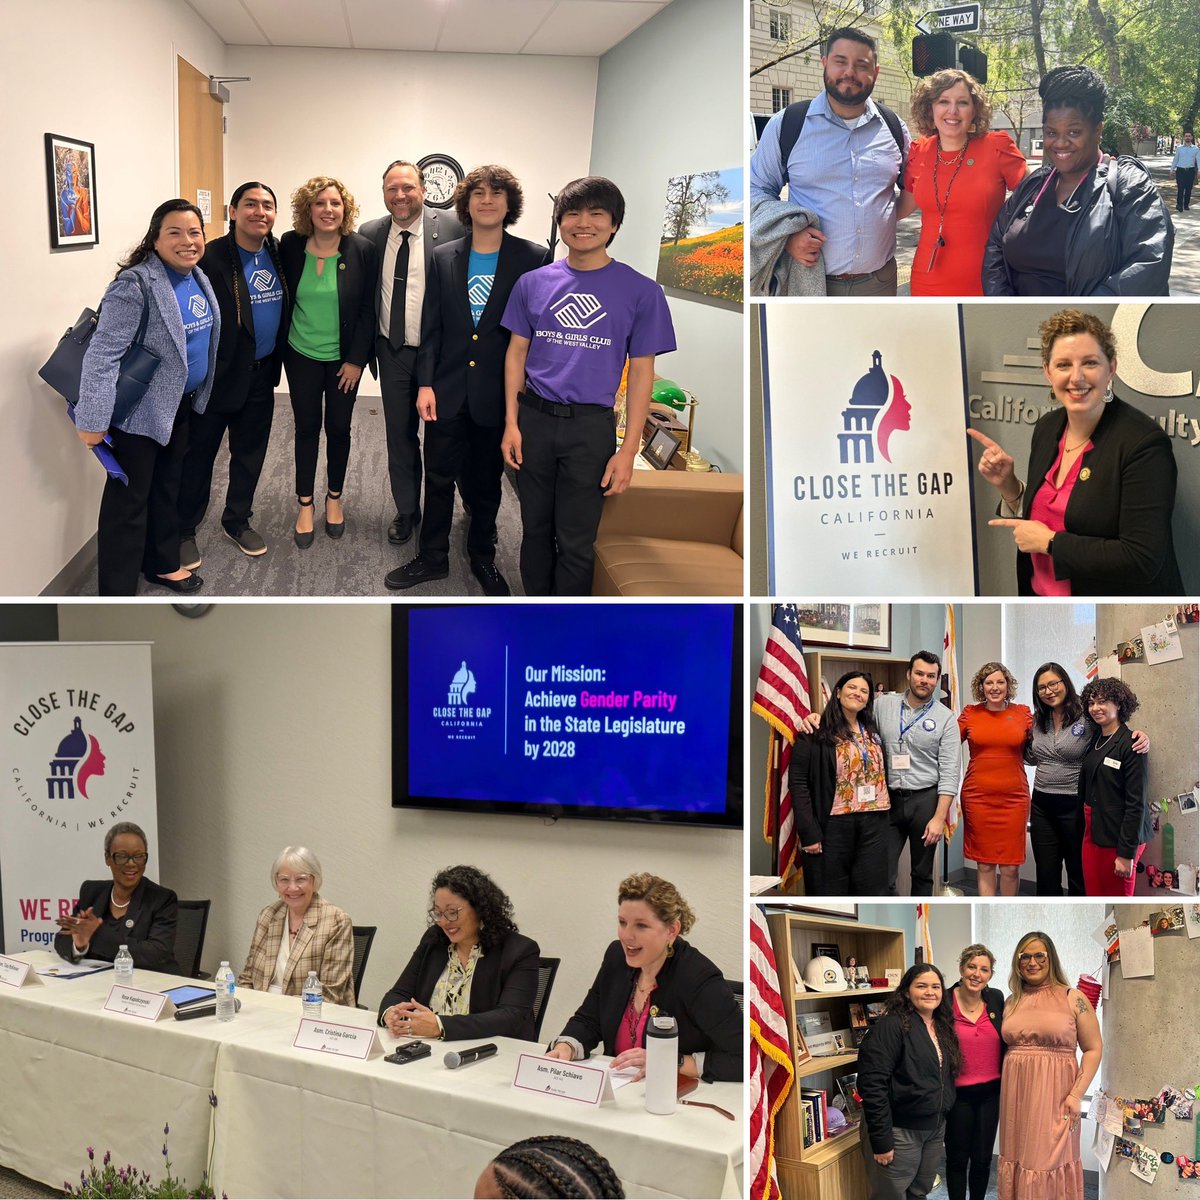 🌟 Another bustling week in Sacramento with committee hearings and impactful meetings 🌟 Participated in an insightful @closethegapCA panel with my colleagues! Also met with Boys & Girls Club of West Valley, @NEVHC, @ValleyComClinic, @CCALAC, @Latinas4RJ, and @SEIU121RN.